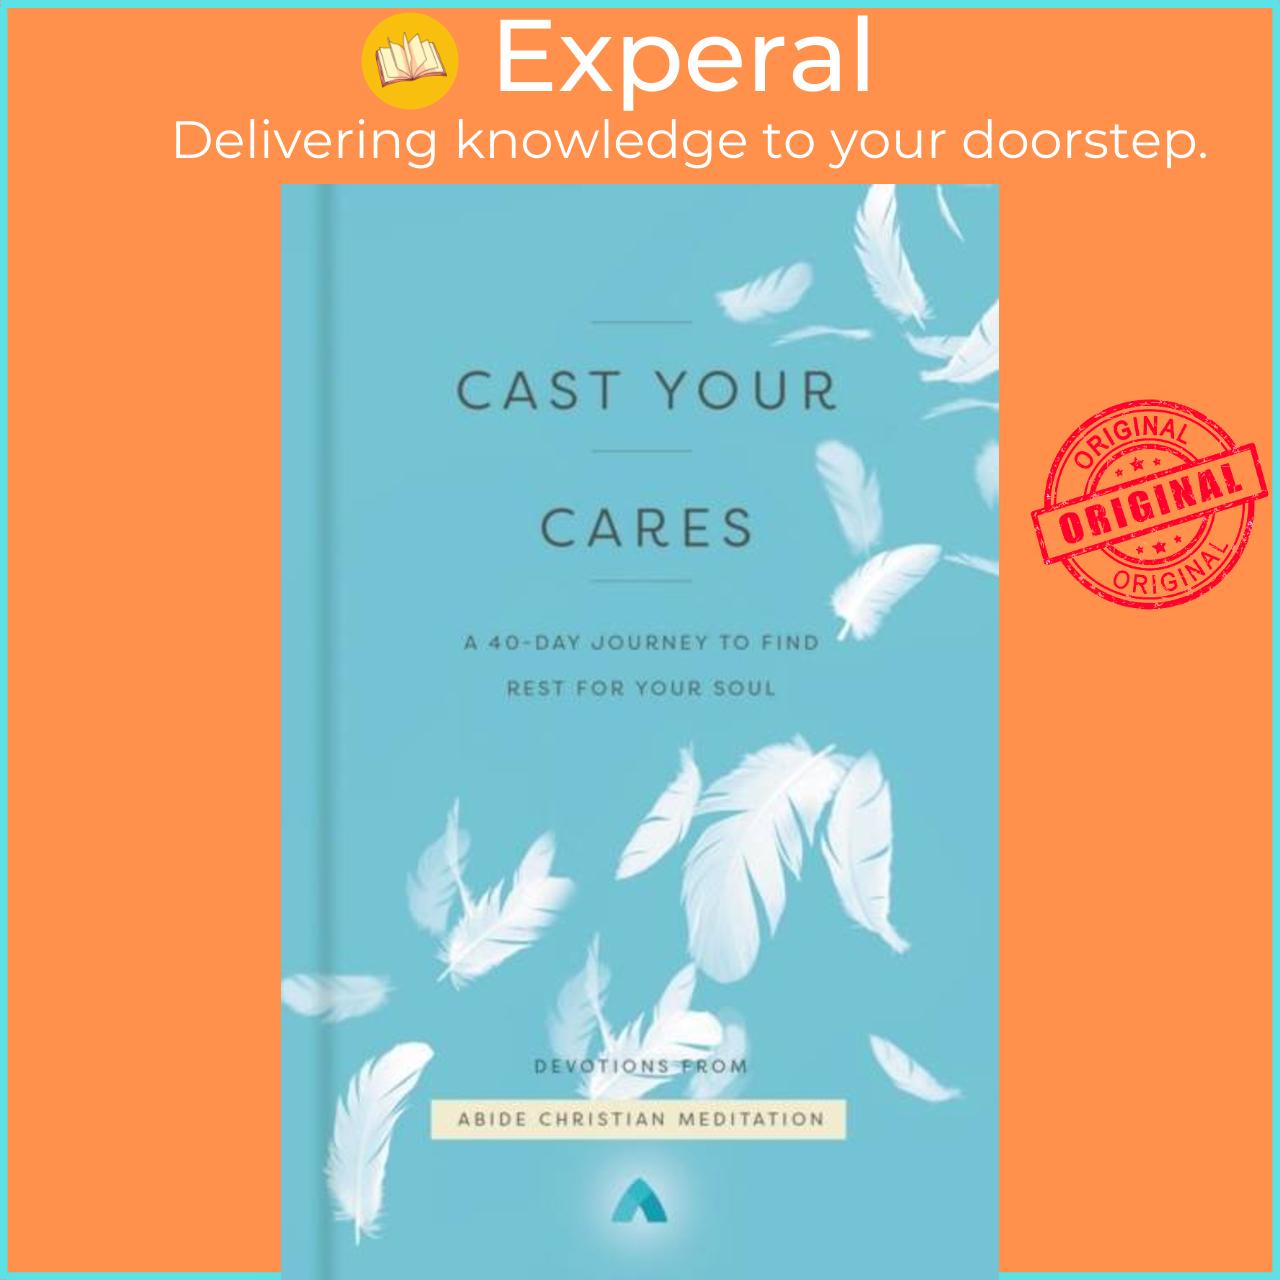 Sách - Cast Your Cares - A 40-Day Journey to Find Rest for Your So by Abide Christian Meditation (UK edition, hardcover)